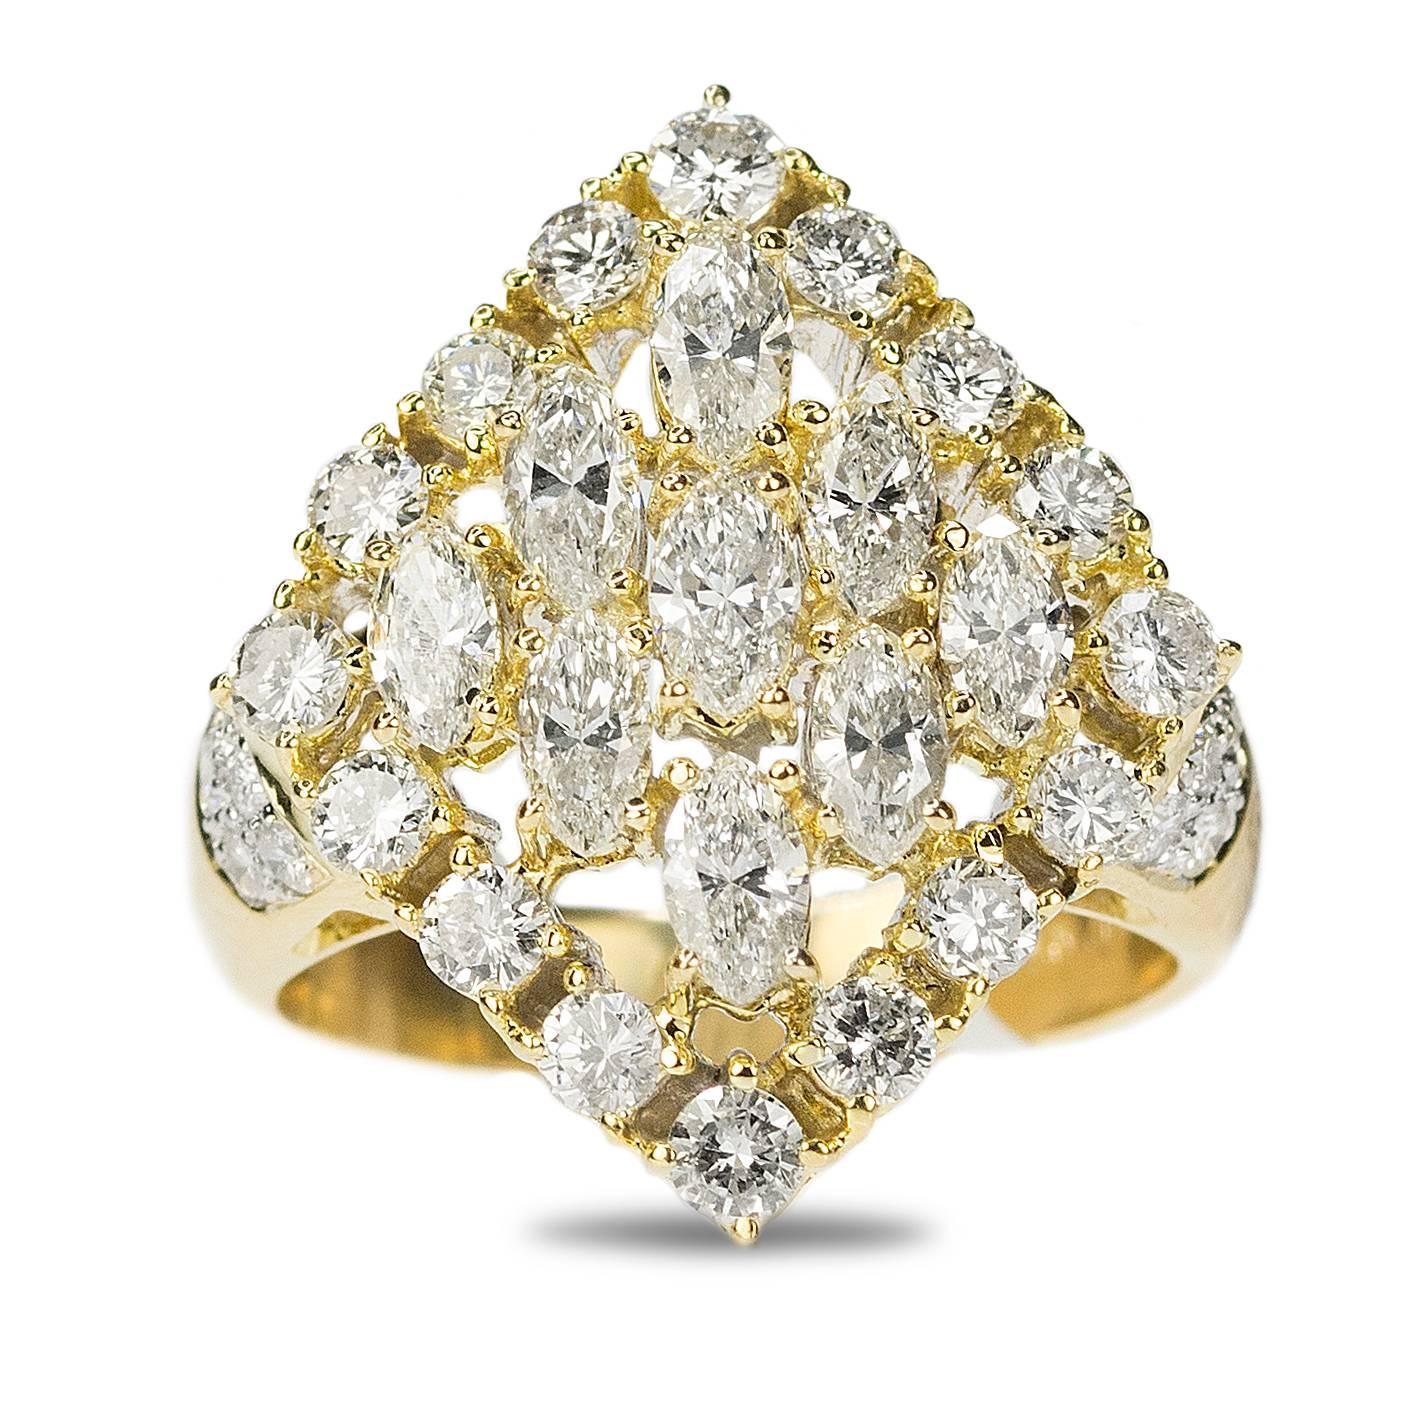 Substantial 18k yellow gold ring with approximately 3.00 carats of collection color/clarity Marquis and Round Brilliant diamonds.